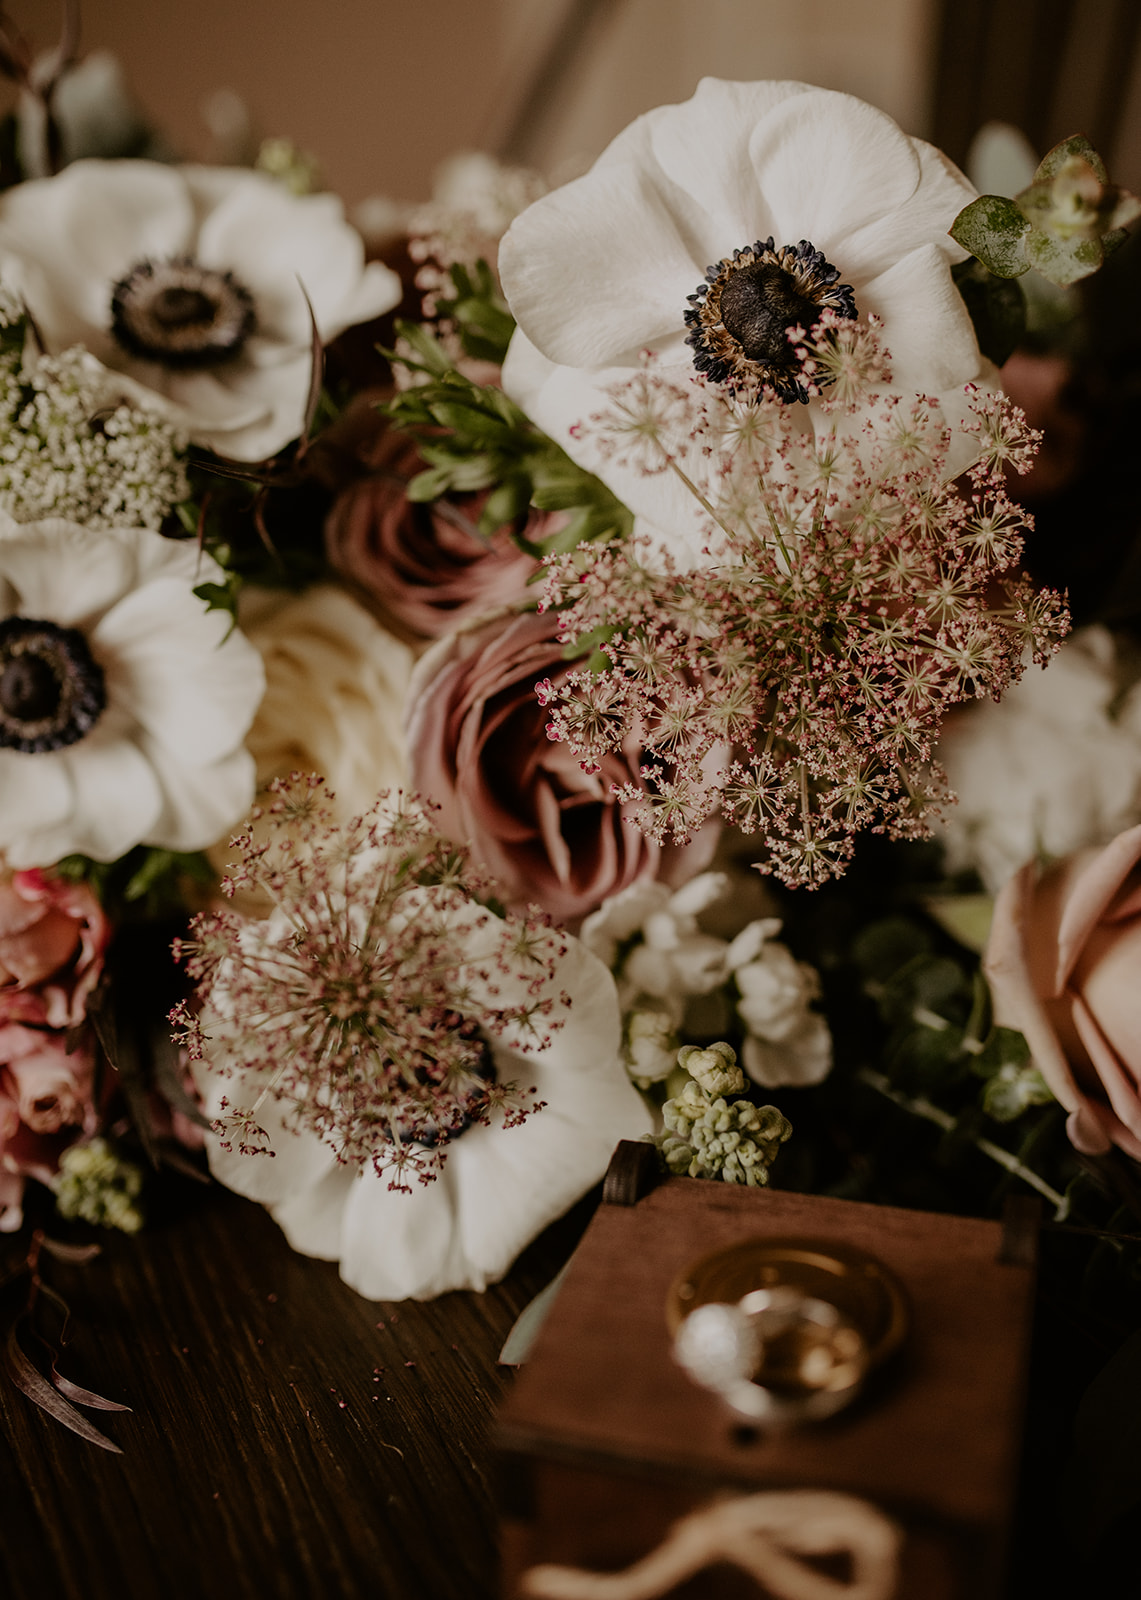 Wedding ring details with flowers in background